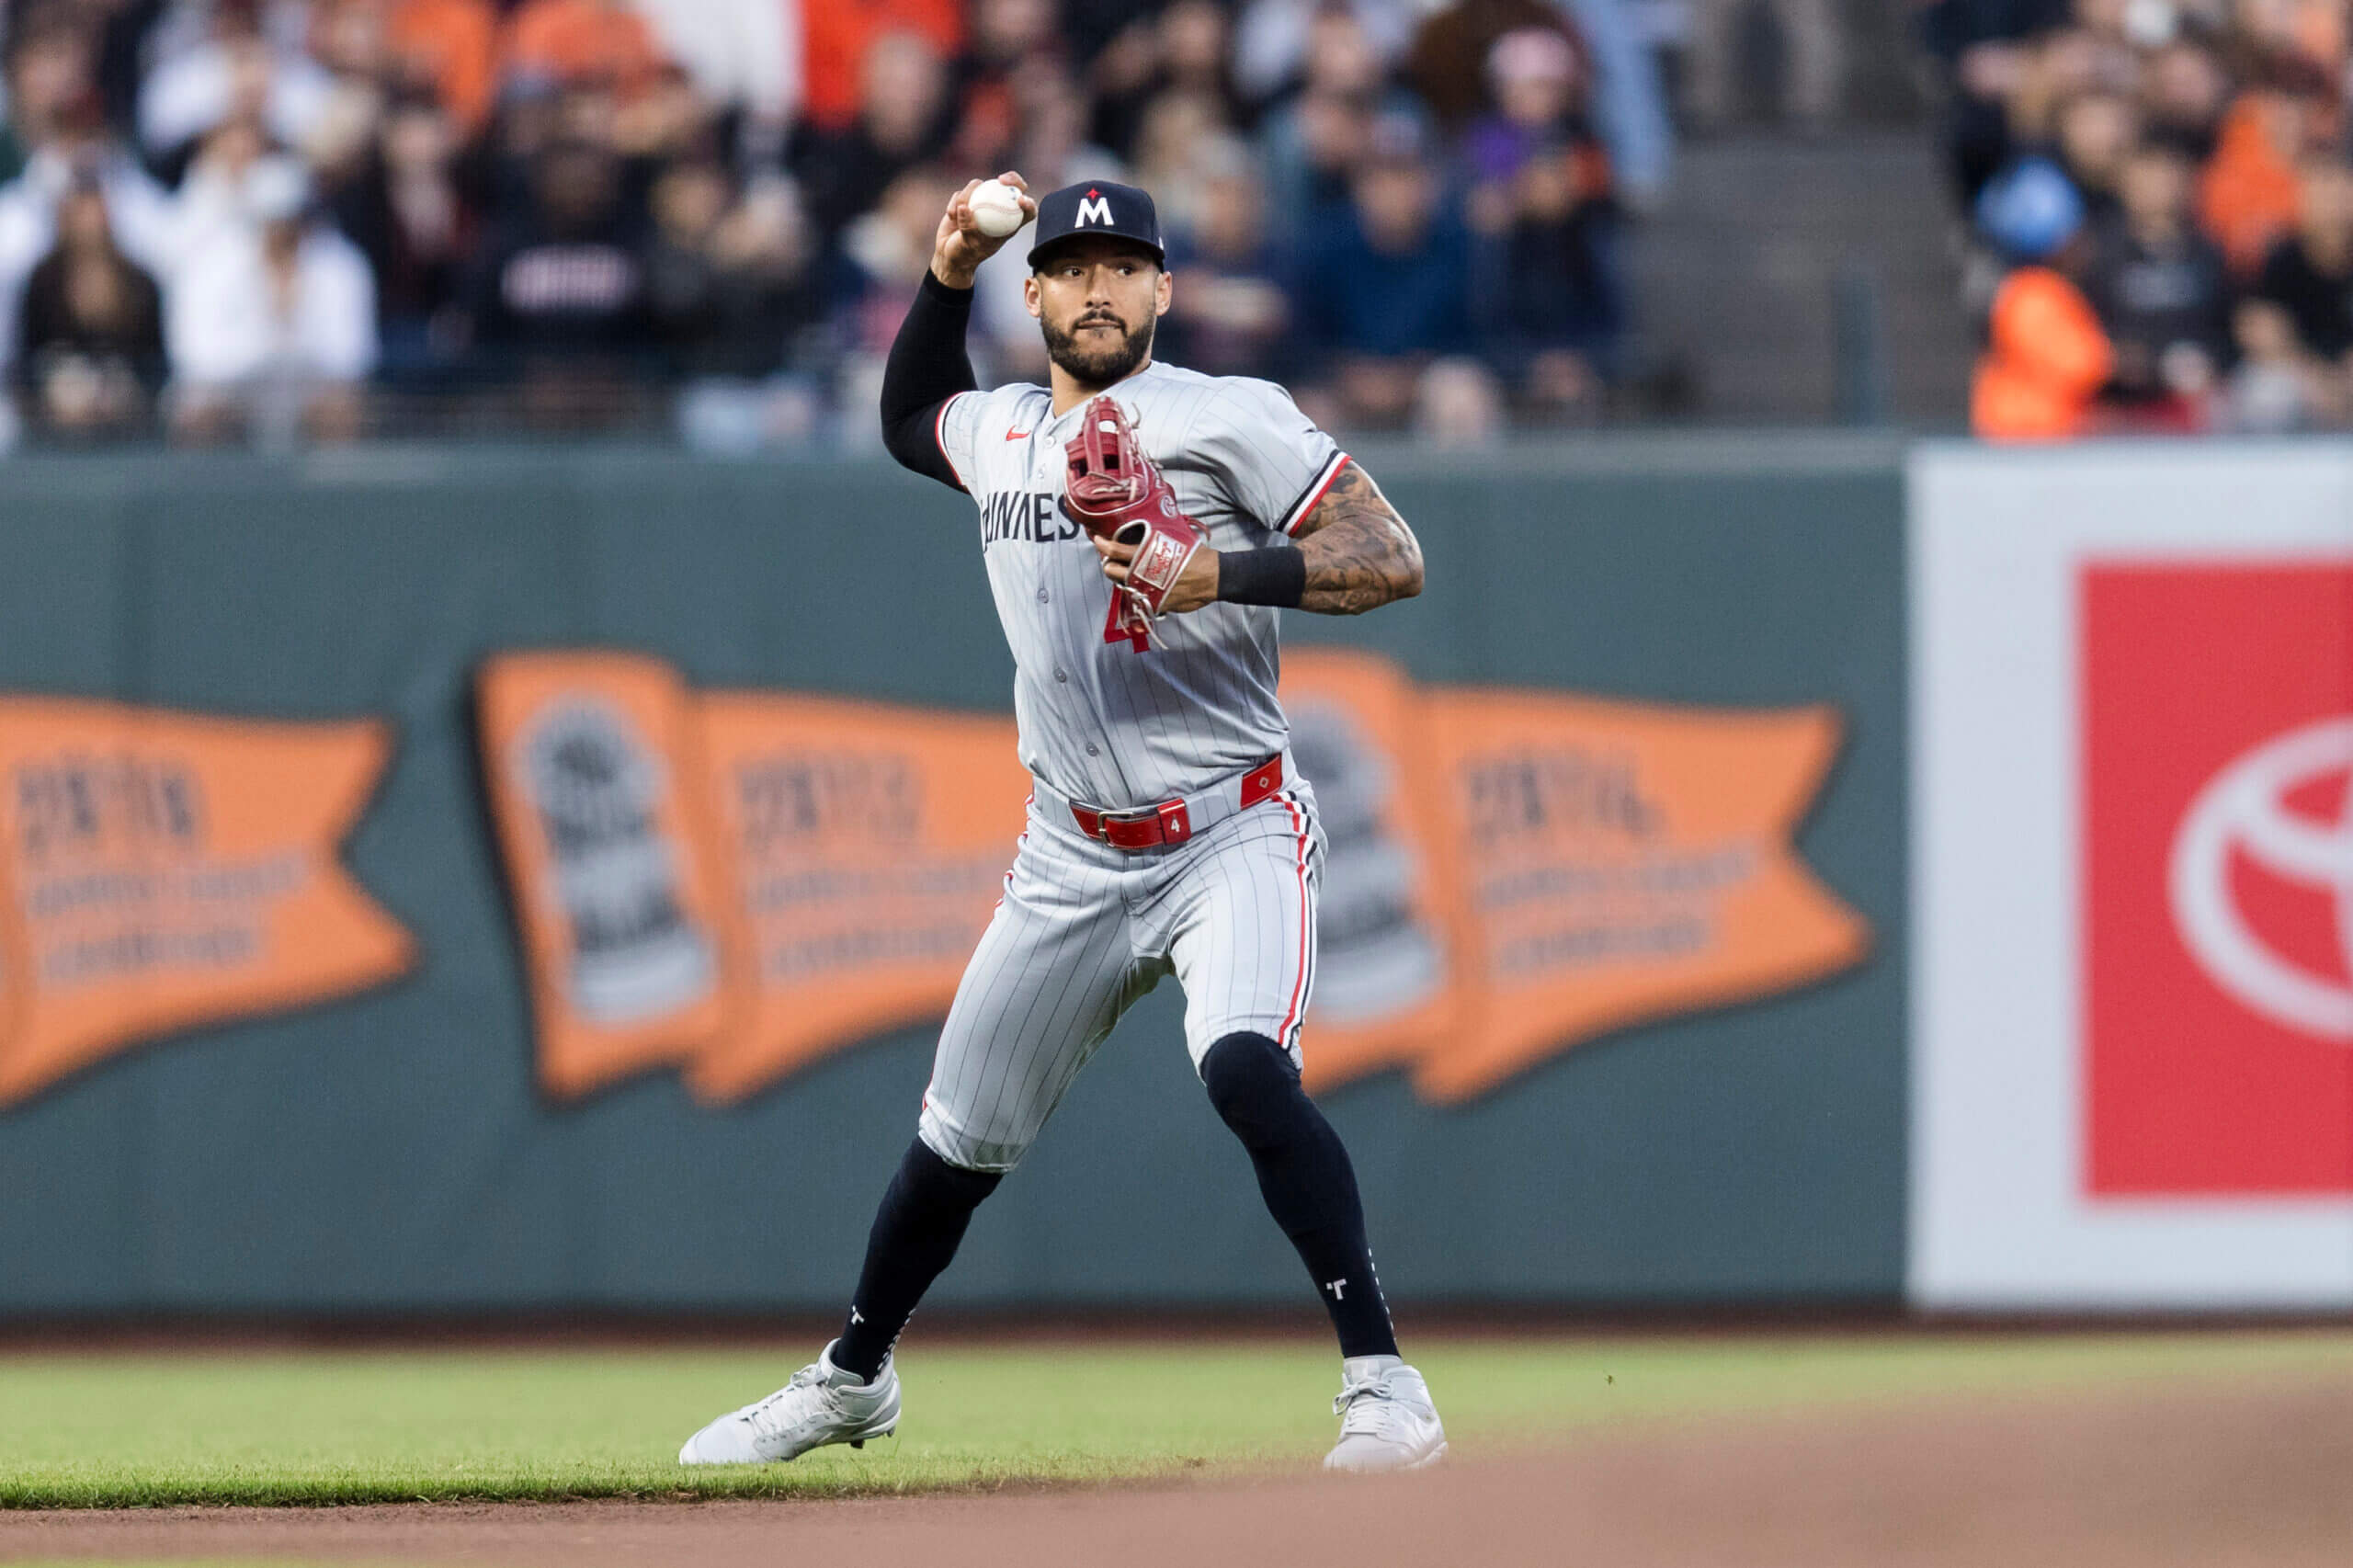 Back in San Francisco first time since failed megadeal, Carlos Correa content, looking ahead